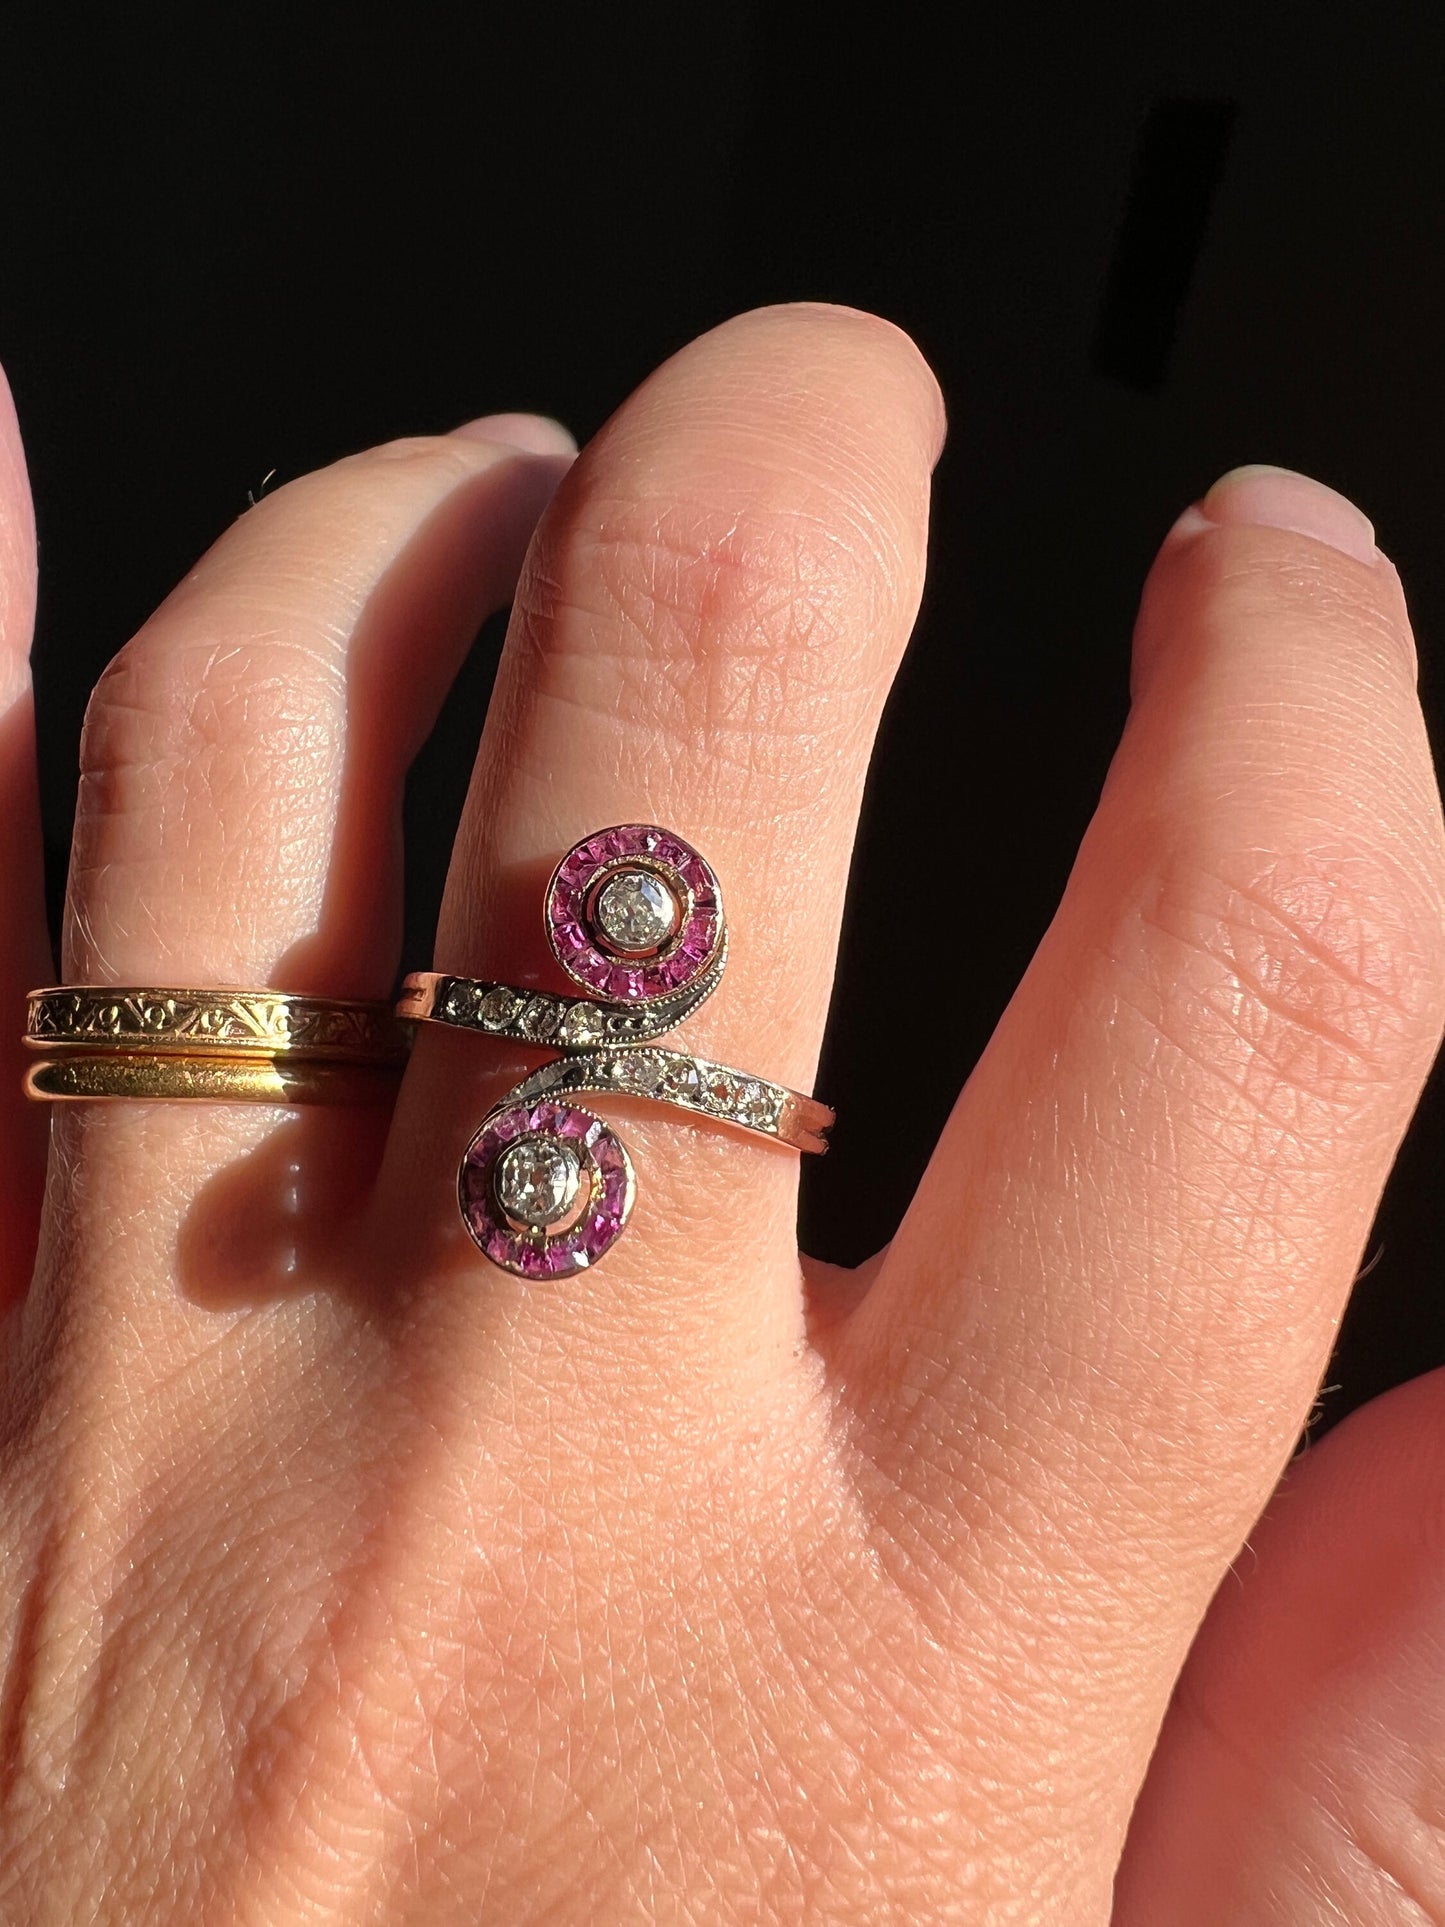 French ANTIQUE Old Mine Cut DIAMOND Toi et Moi Ring Natural Ruby Halo Infinity Swirl 14k Rose Gold Art Nouveau Victorian Romantic Gift OmC